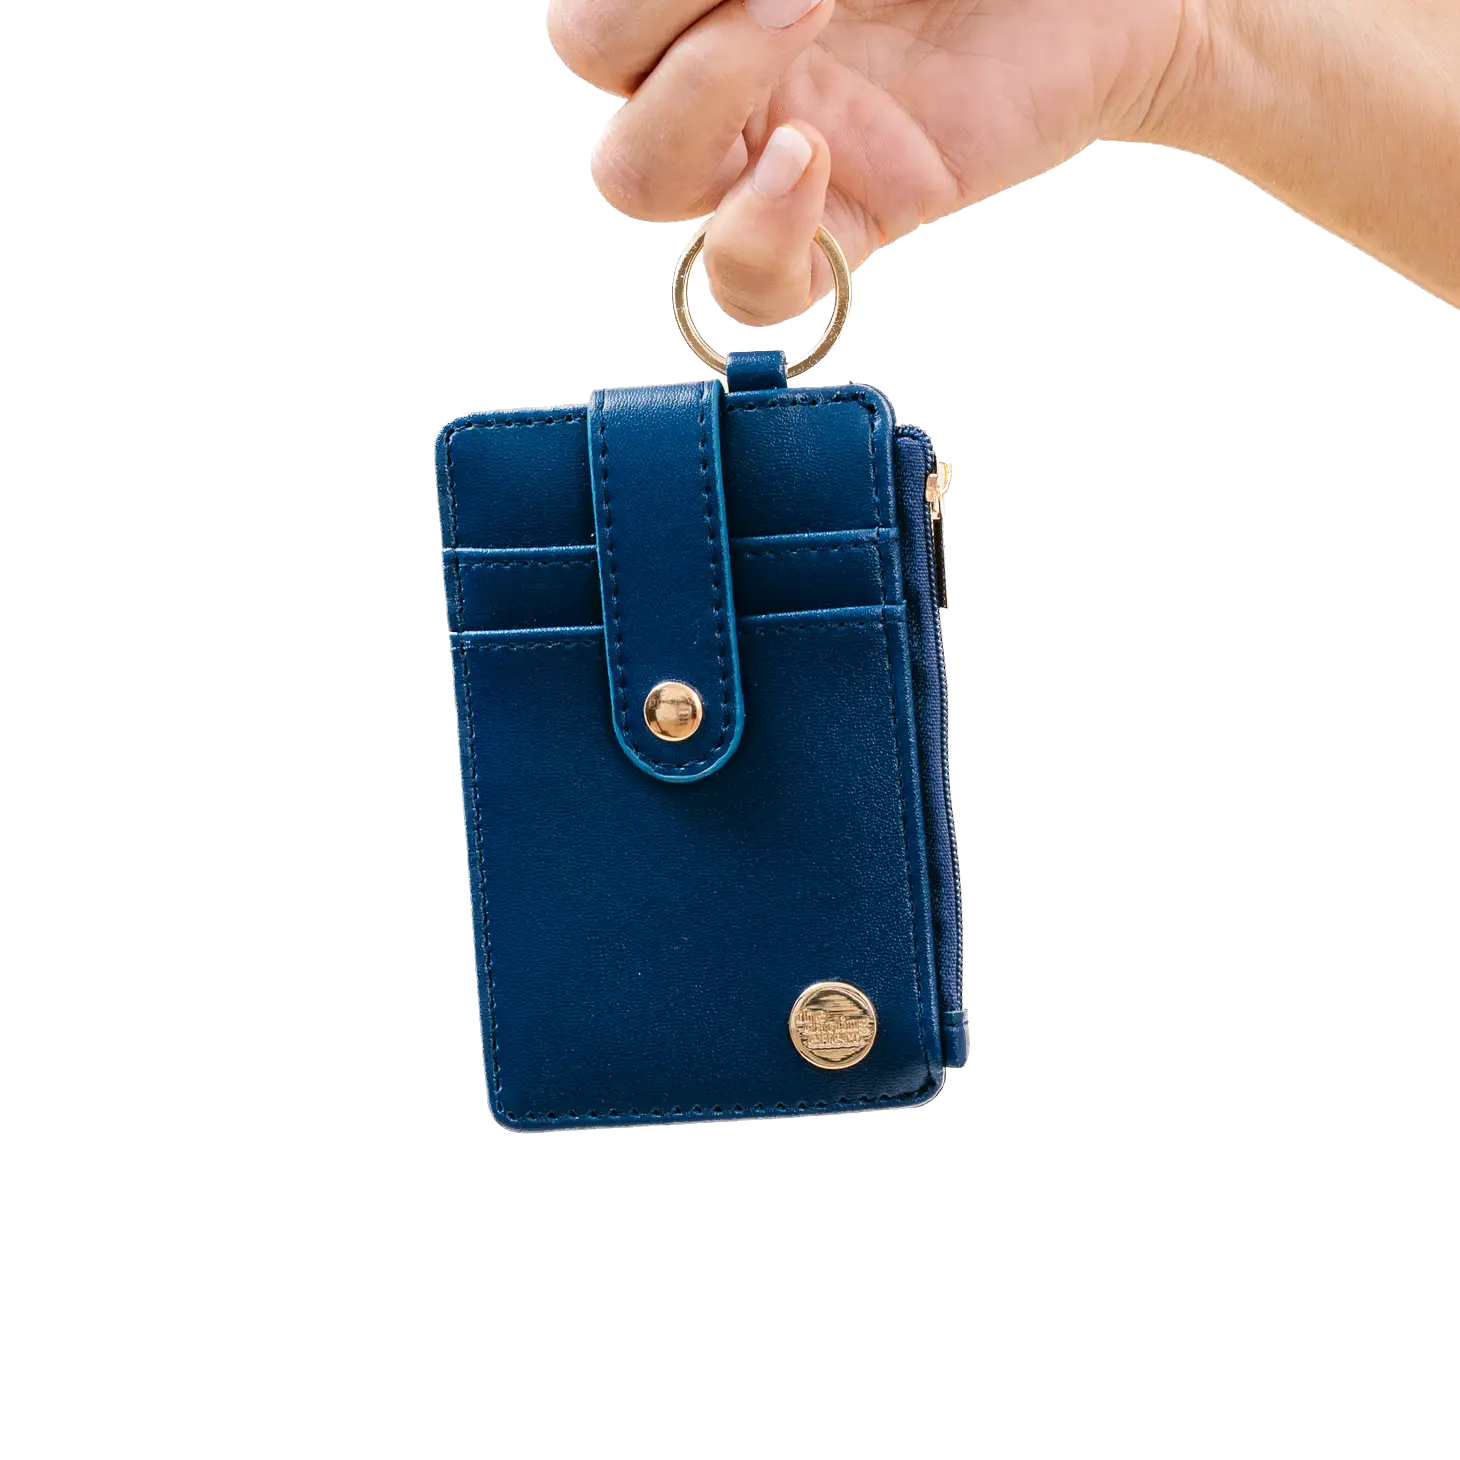 Solid Keychain Wallet